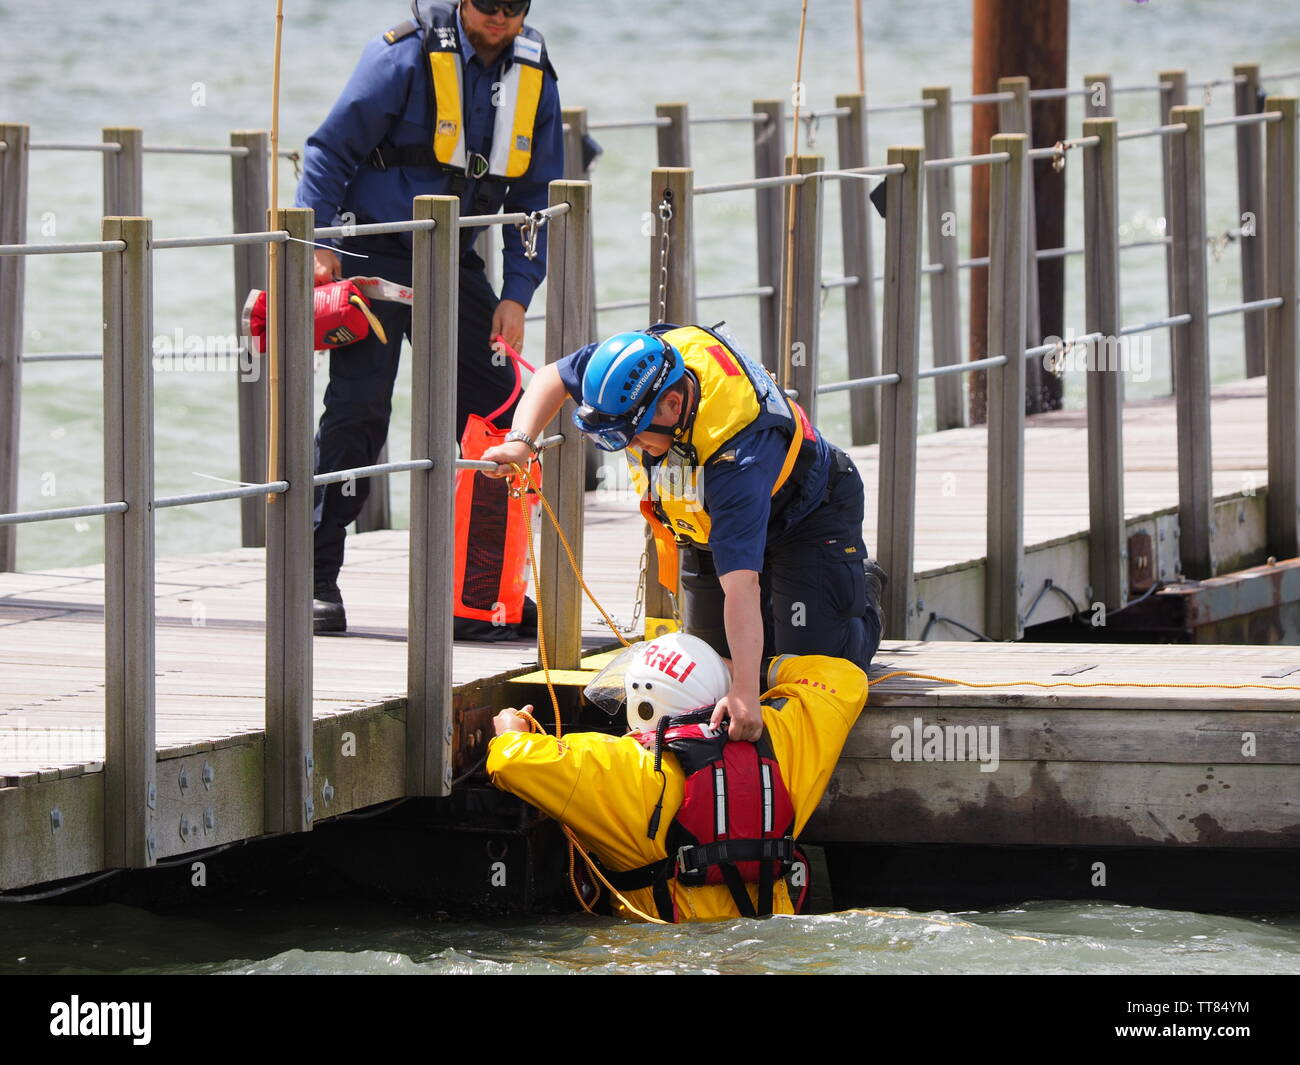 Queenborough, Kent, UK. 15th June, 2019. Sheerness RNLI held an Open Day in Queenborough Habour, Kent this day with various demonstrations. A volunteer is rescued from the water using a throw line from a Coastguard officer. Credit: James Bell/Alamy Live News Stock Photo